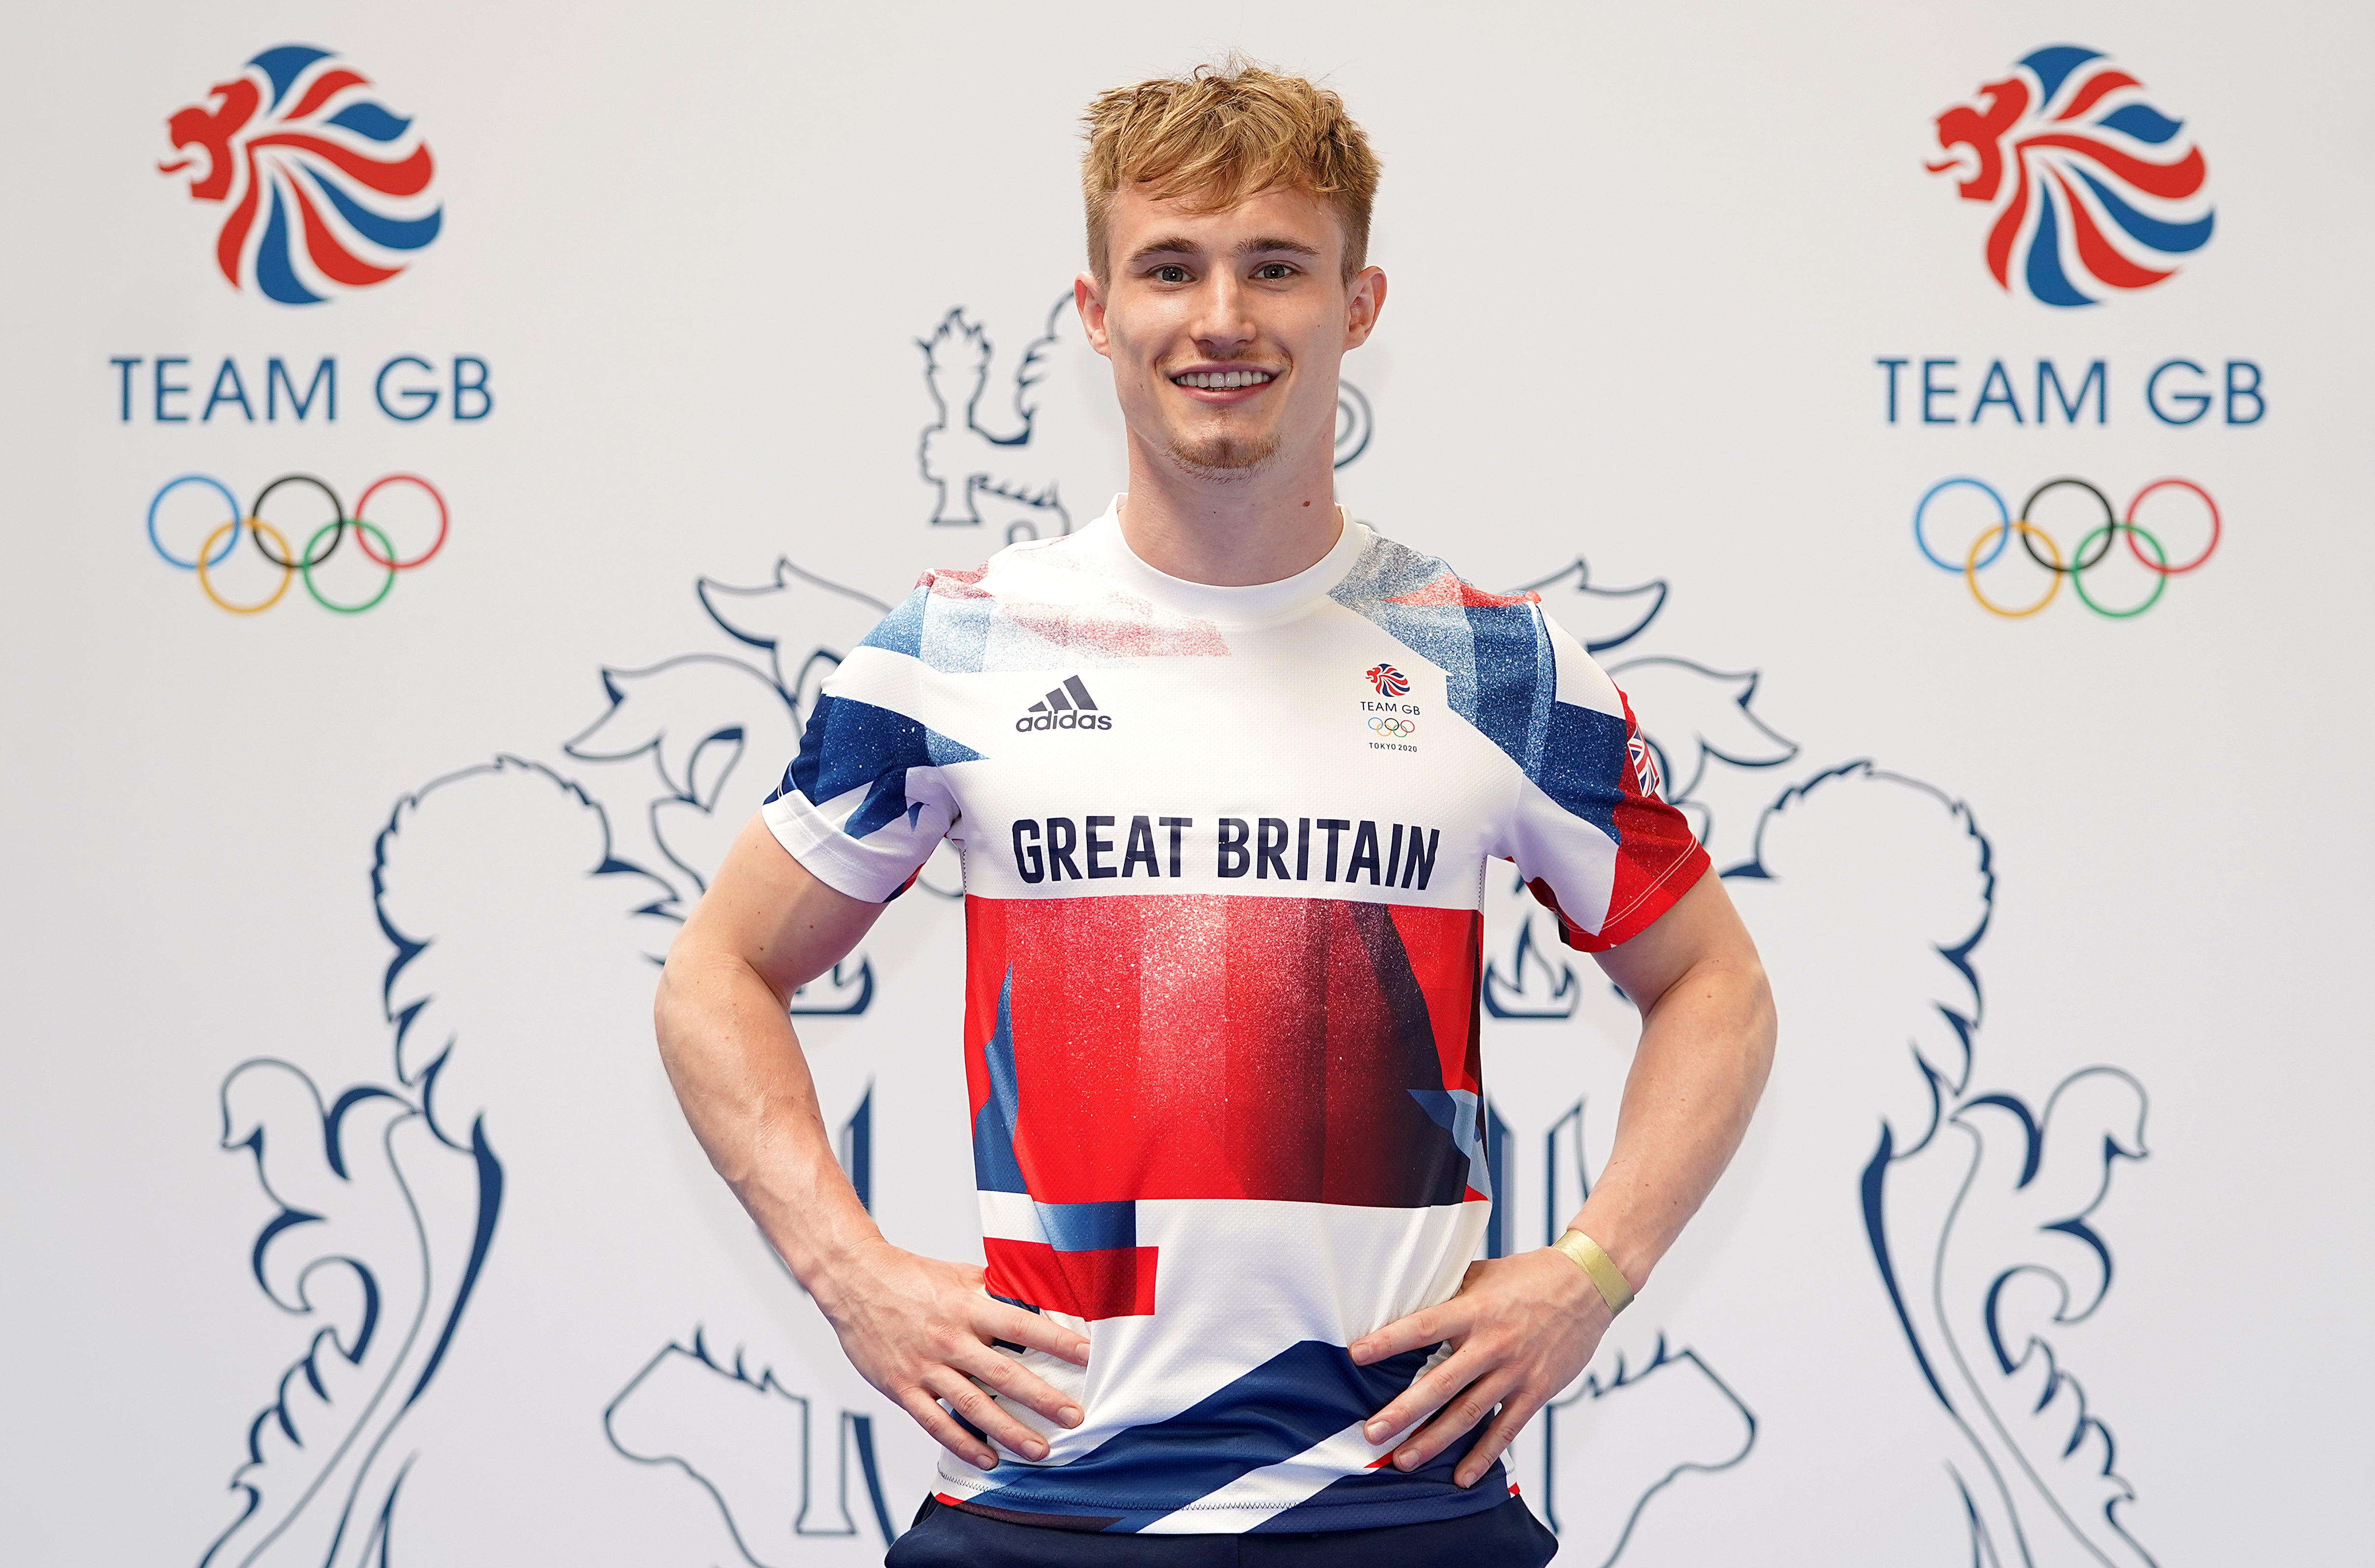 National team GB Great Britain Olympic Jersey Shirt London 2012